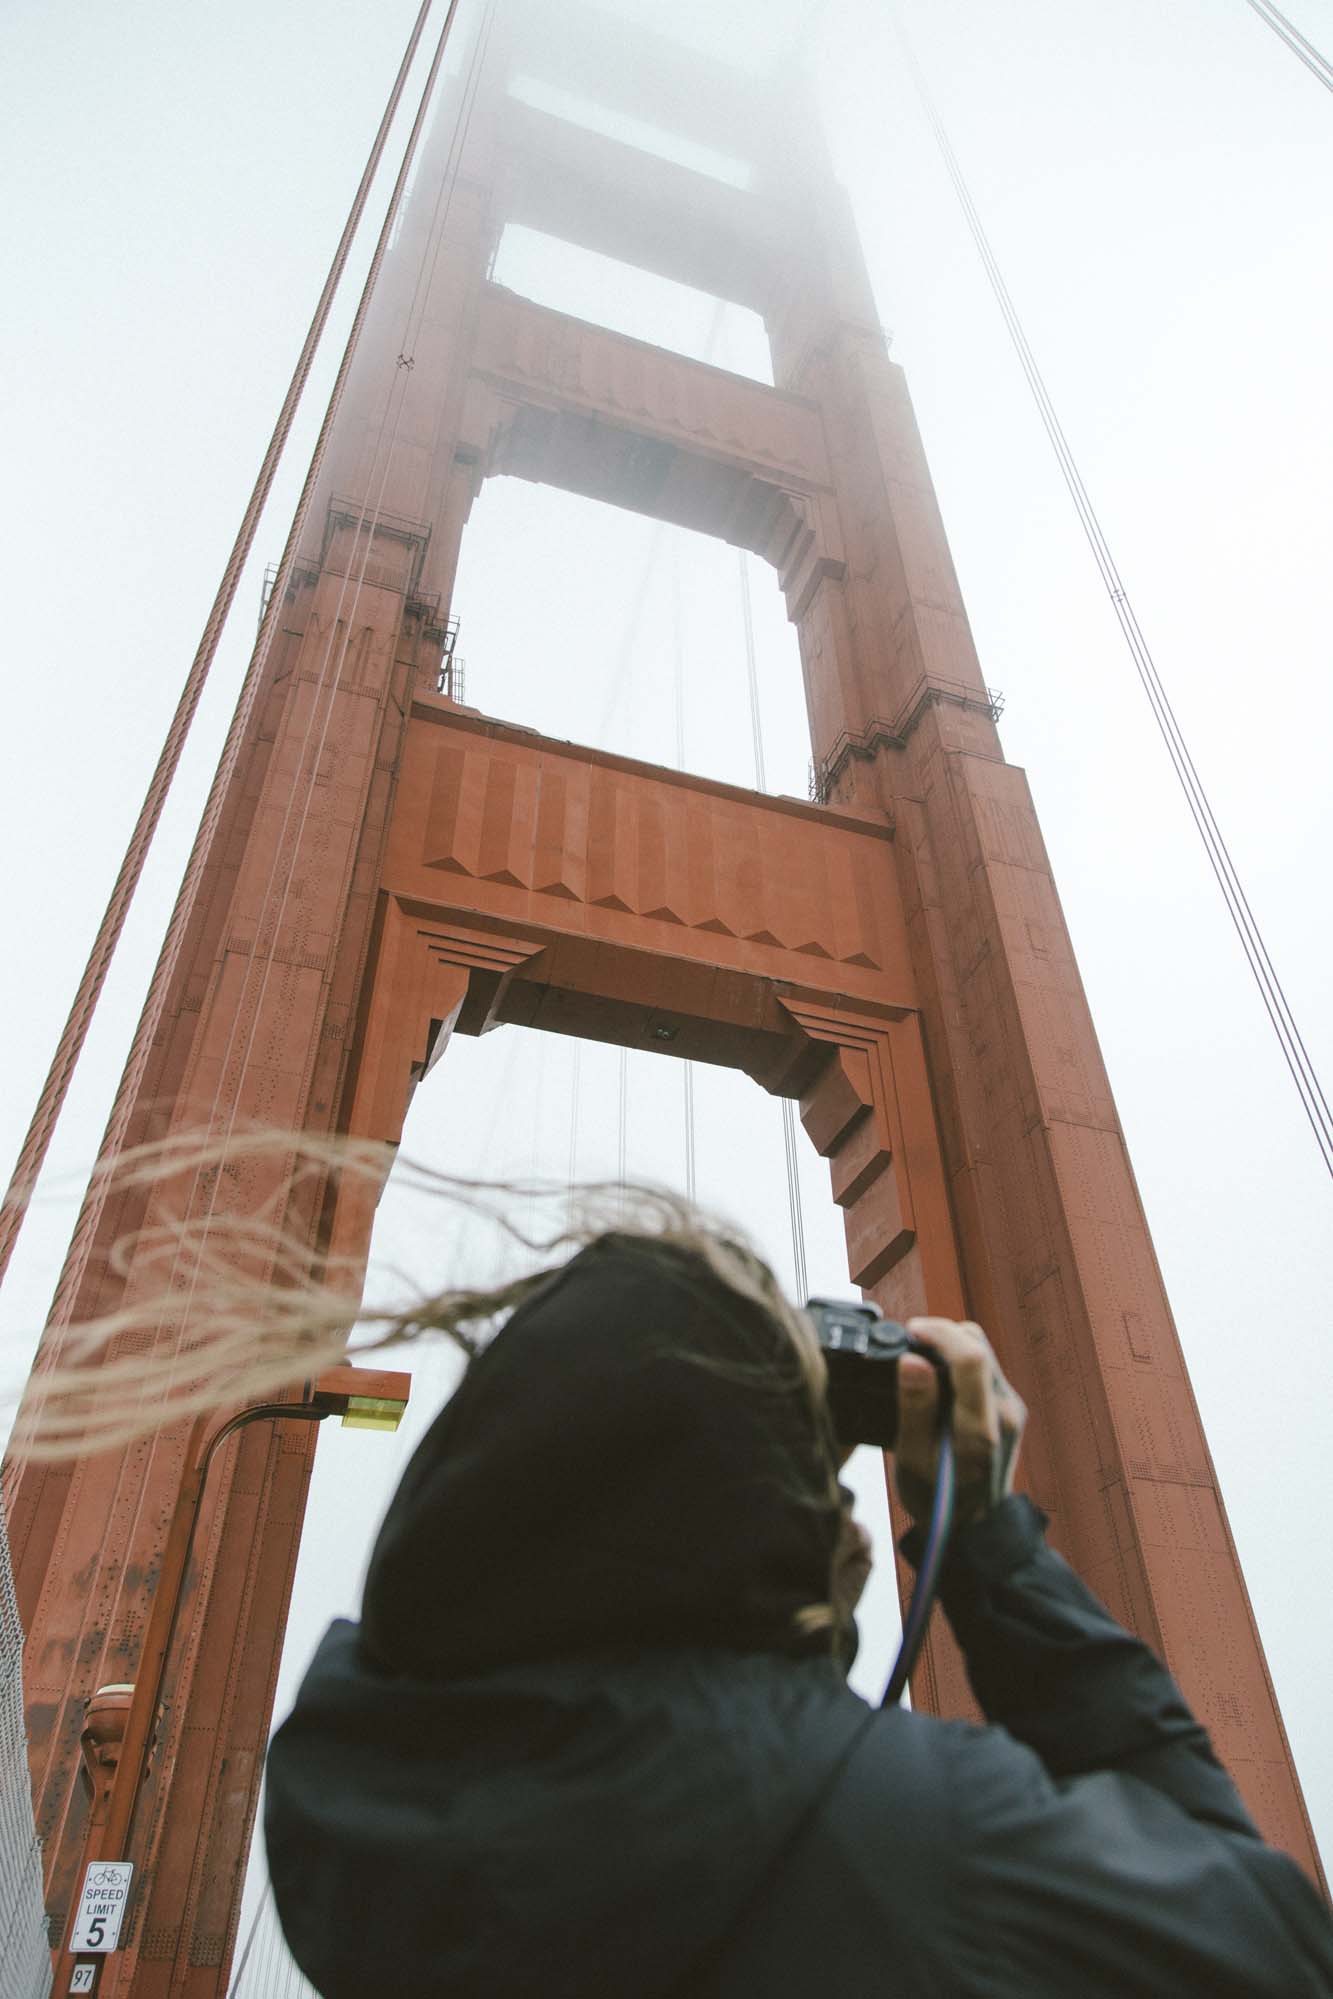 A woman attempting to capture a photo of the "Golden Gate Bridge Tower."